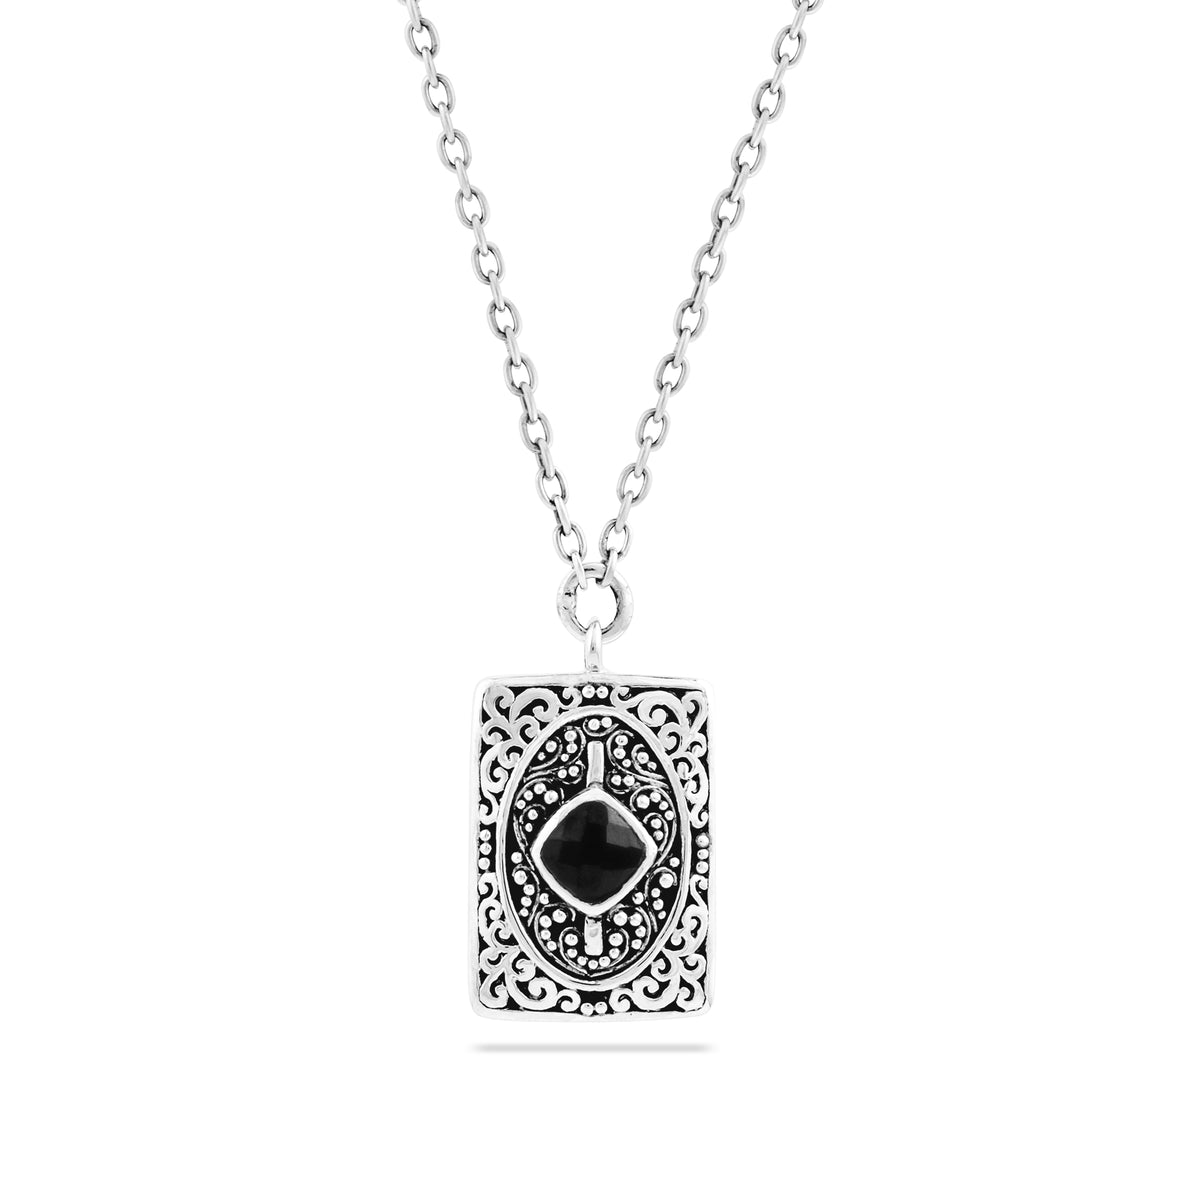 Cushion Black Onyx with Ractangular Alhambra Scroll Necklace